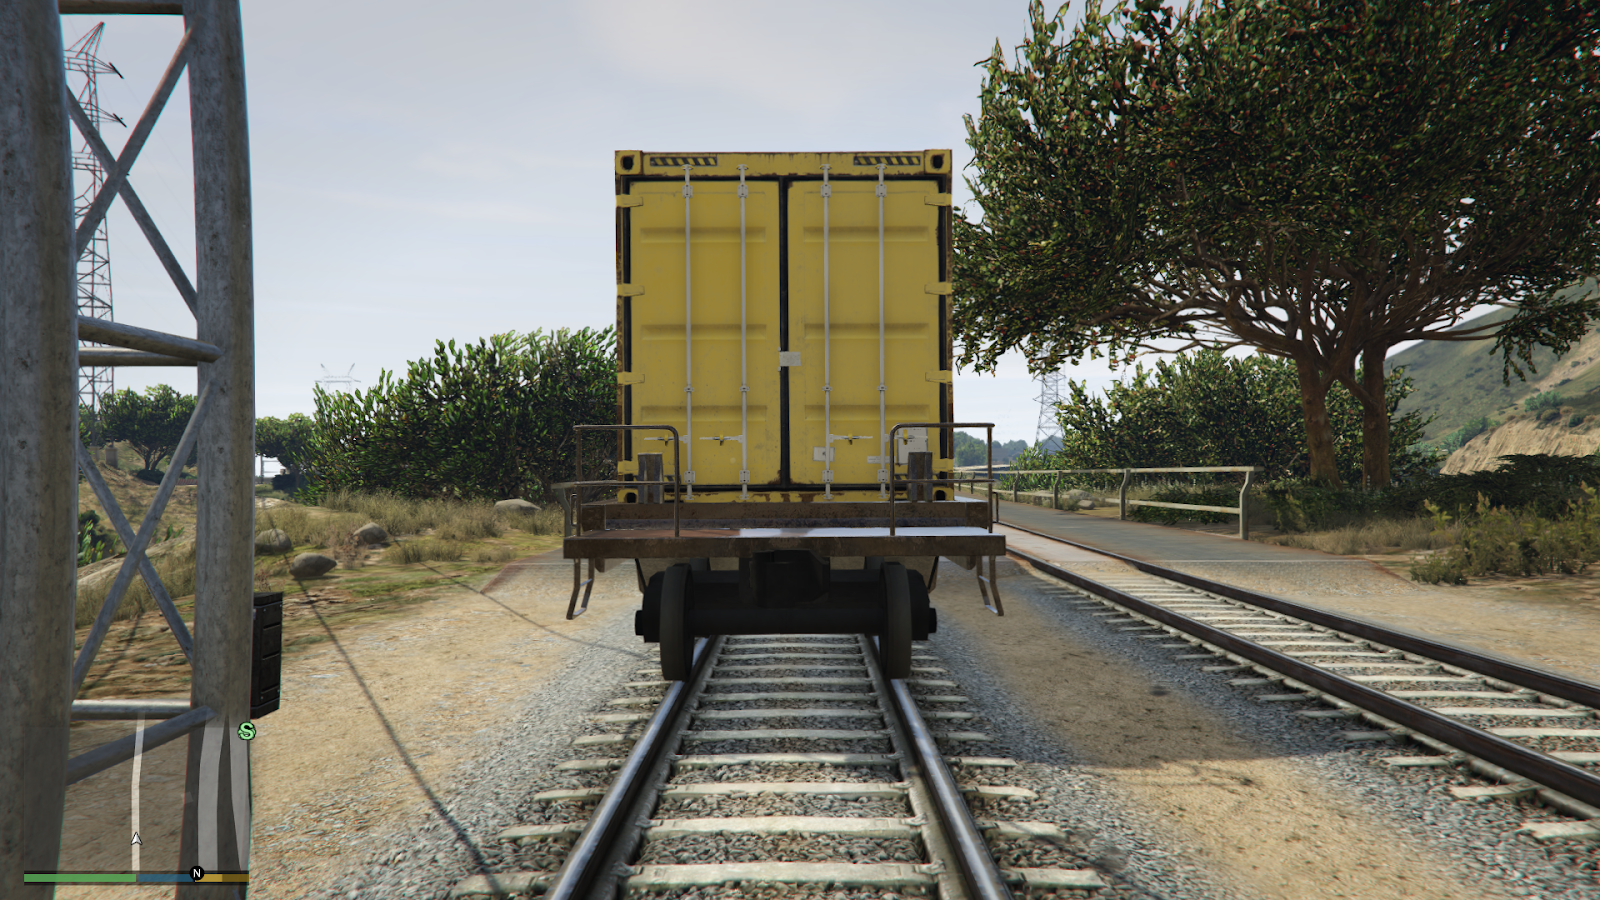 Freight Train(Container Car 1) in GTA V